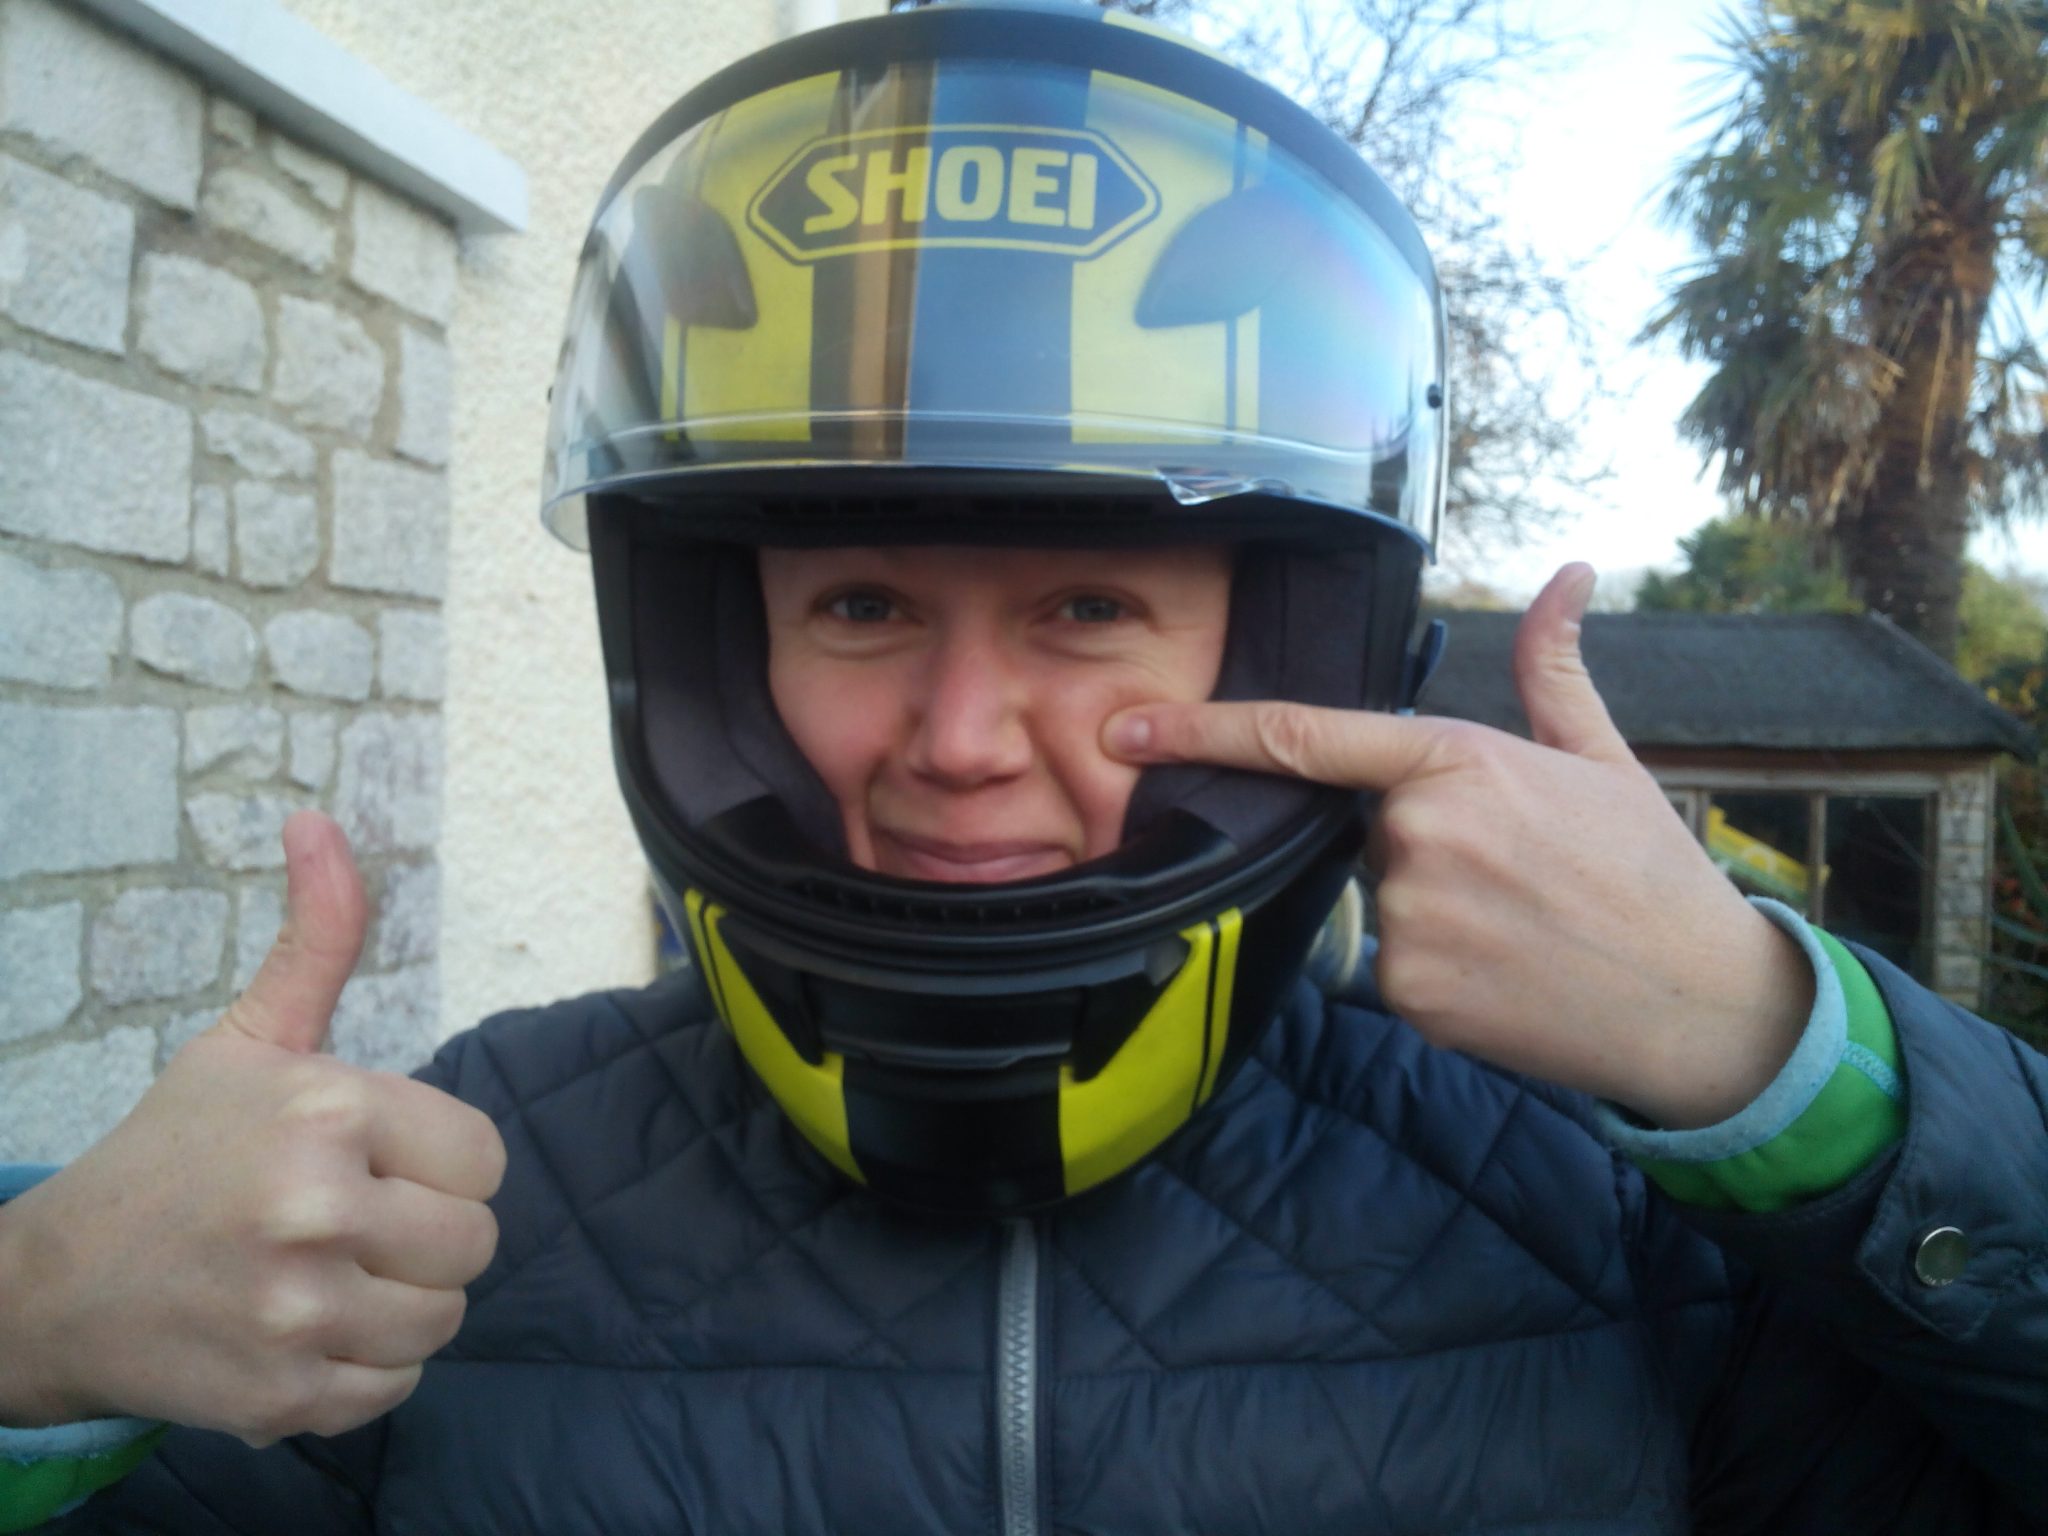 Ah, look at these lovely puffy cheeks, helmet is snug and comfy again